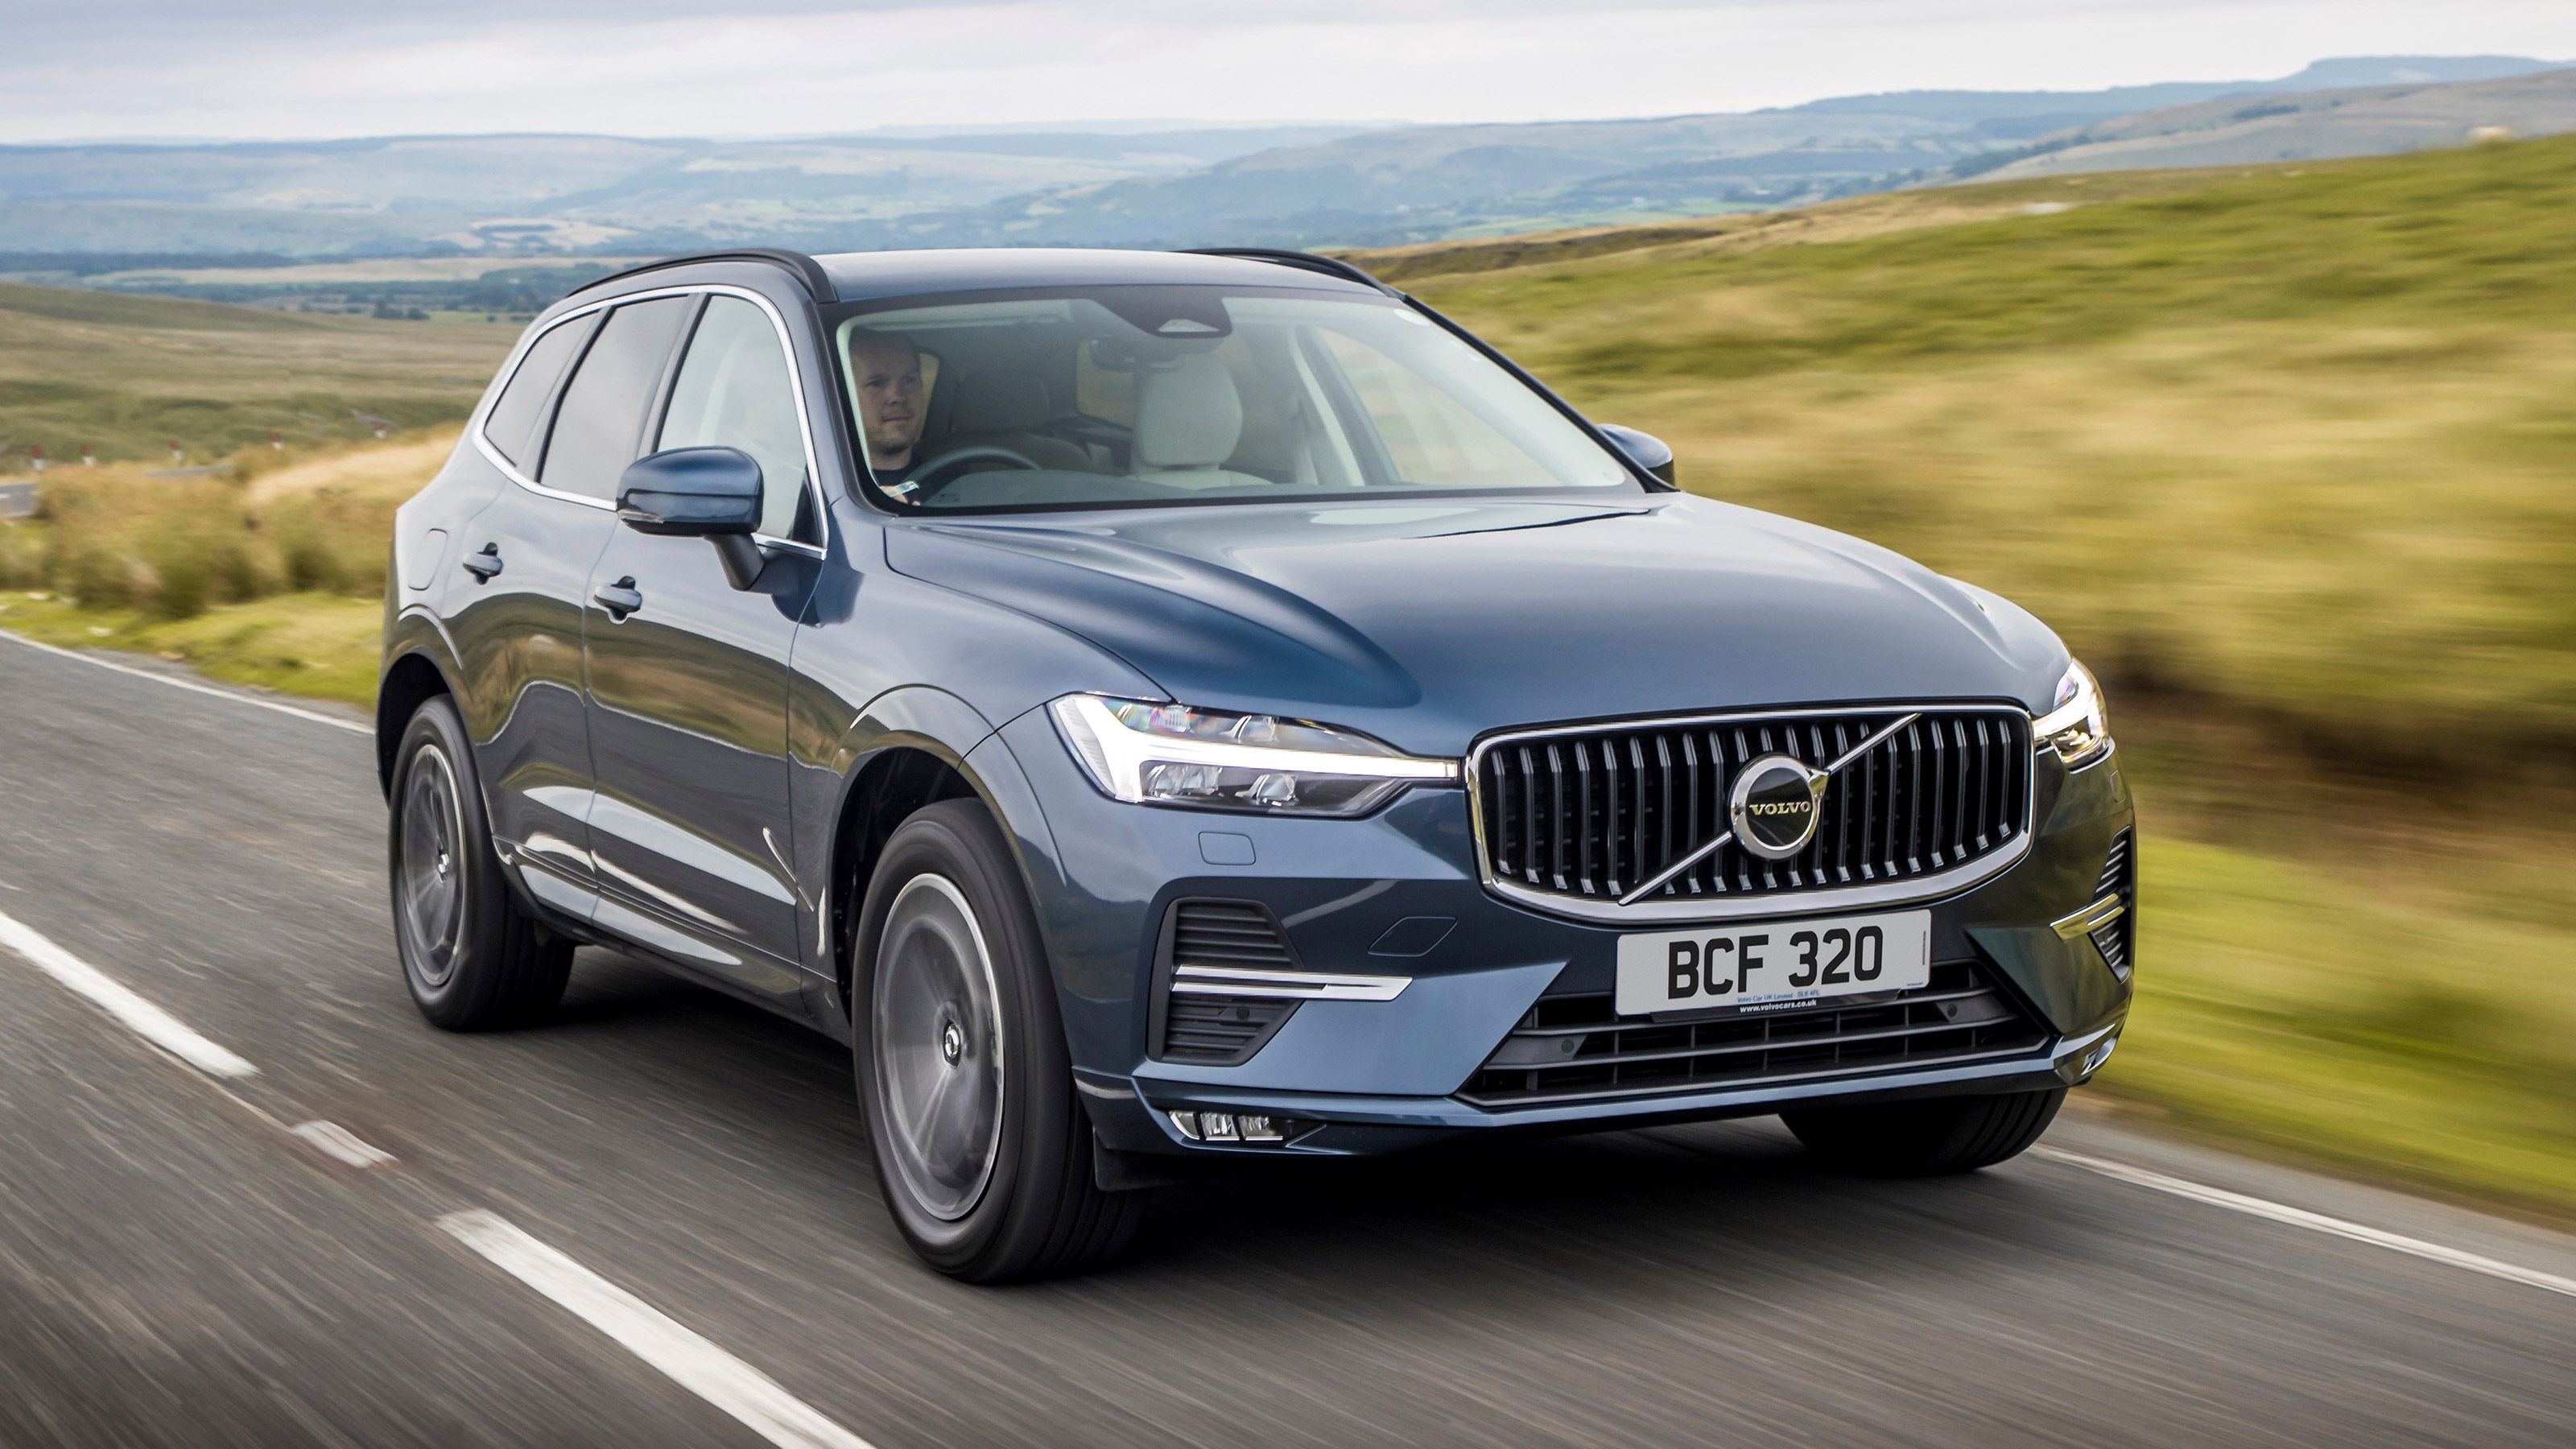 2015 Volvo XC60 Review, Price and Specification